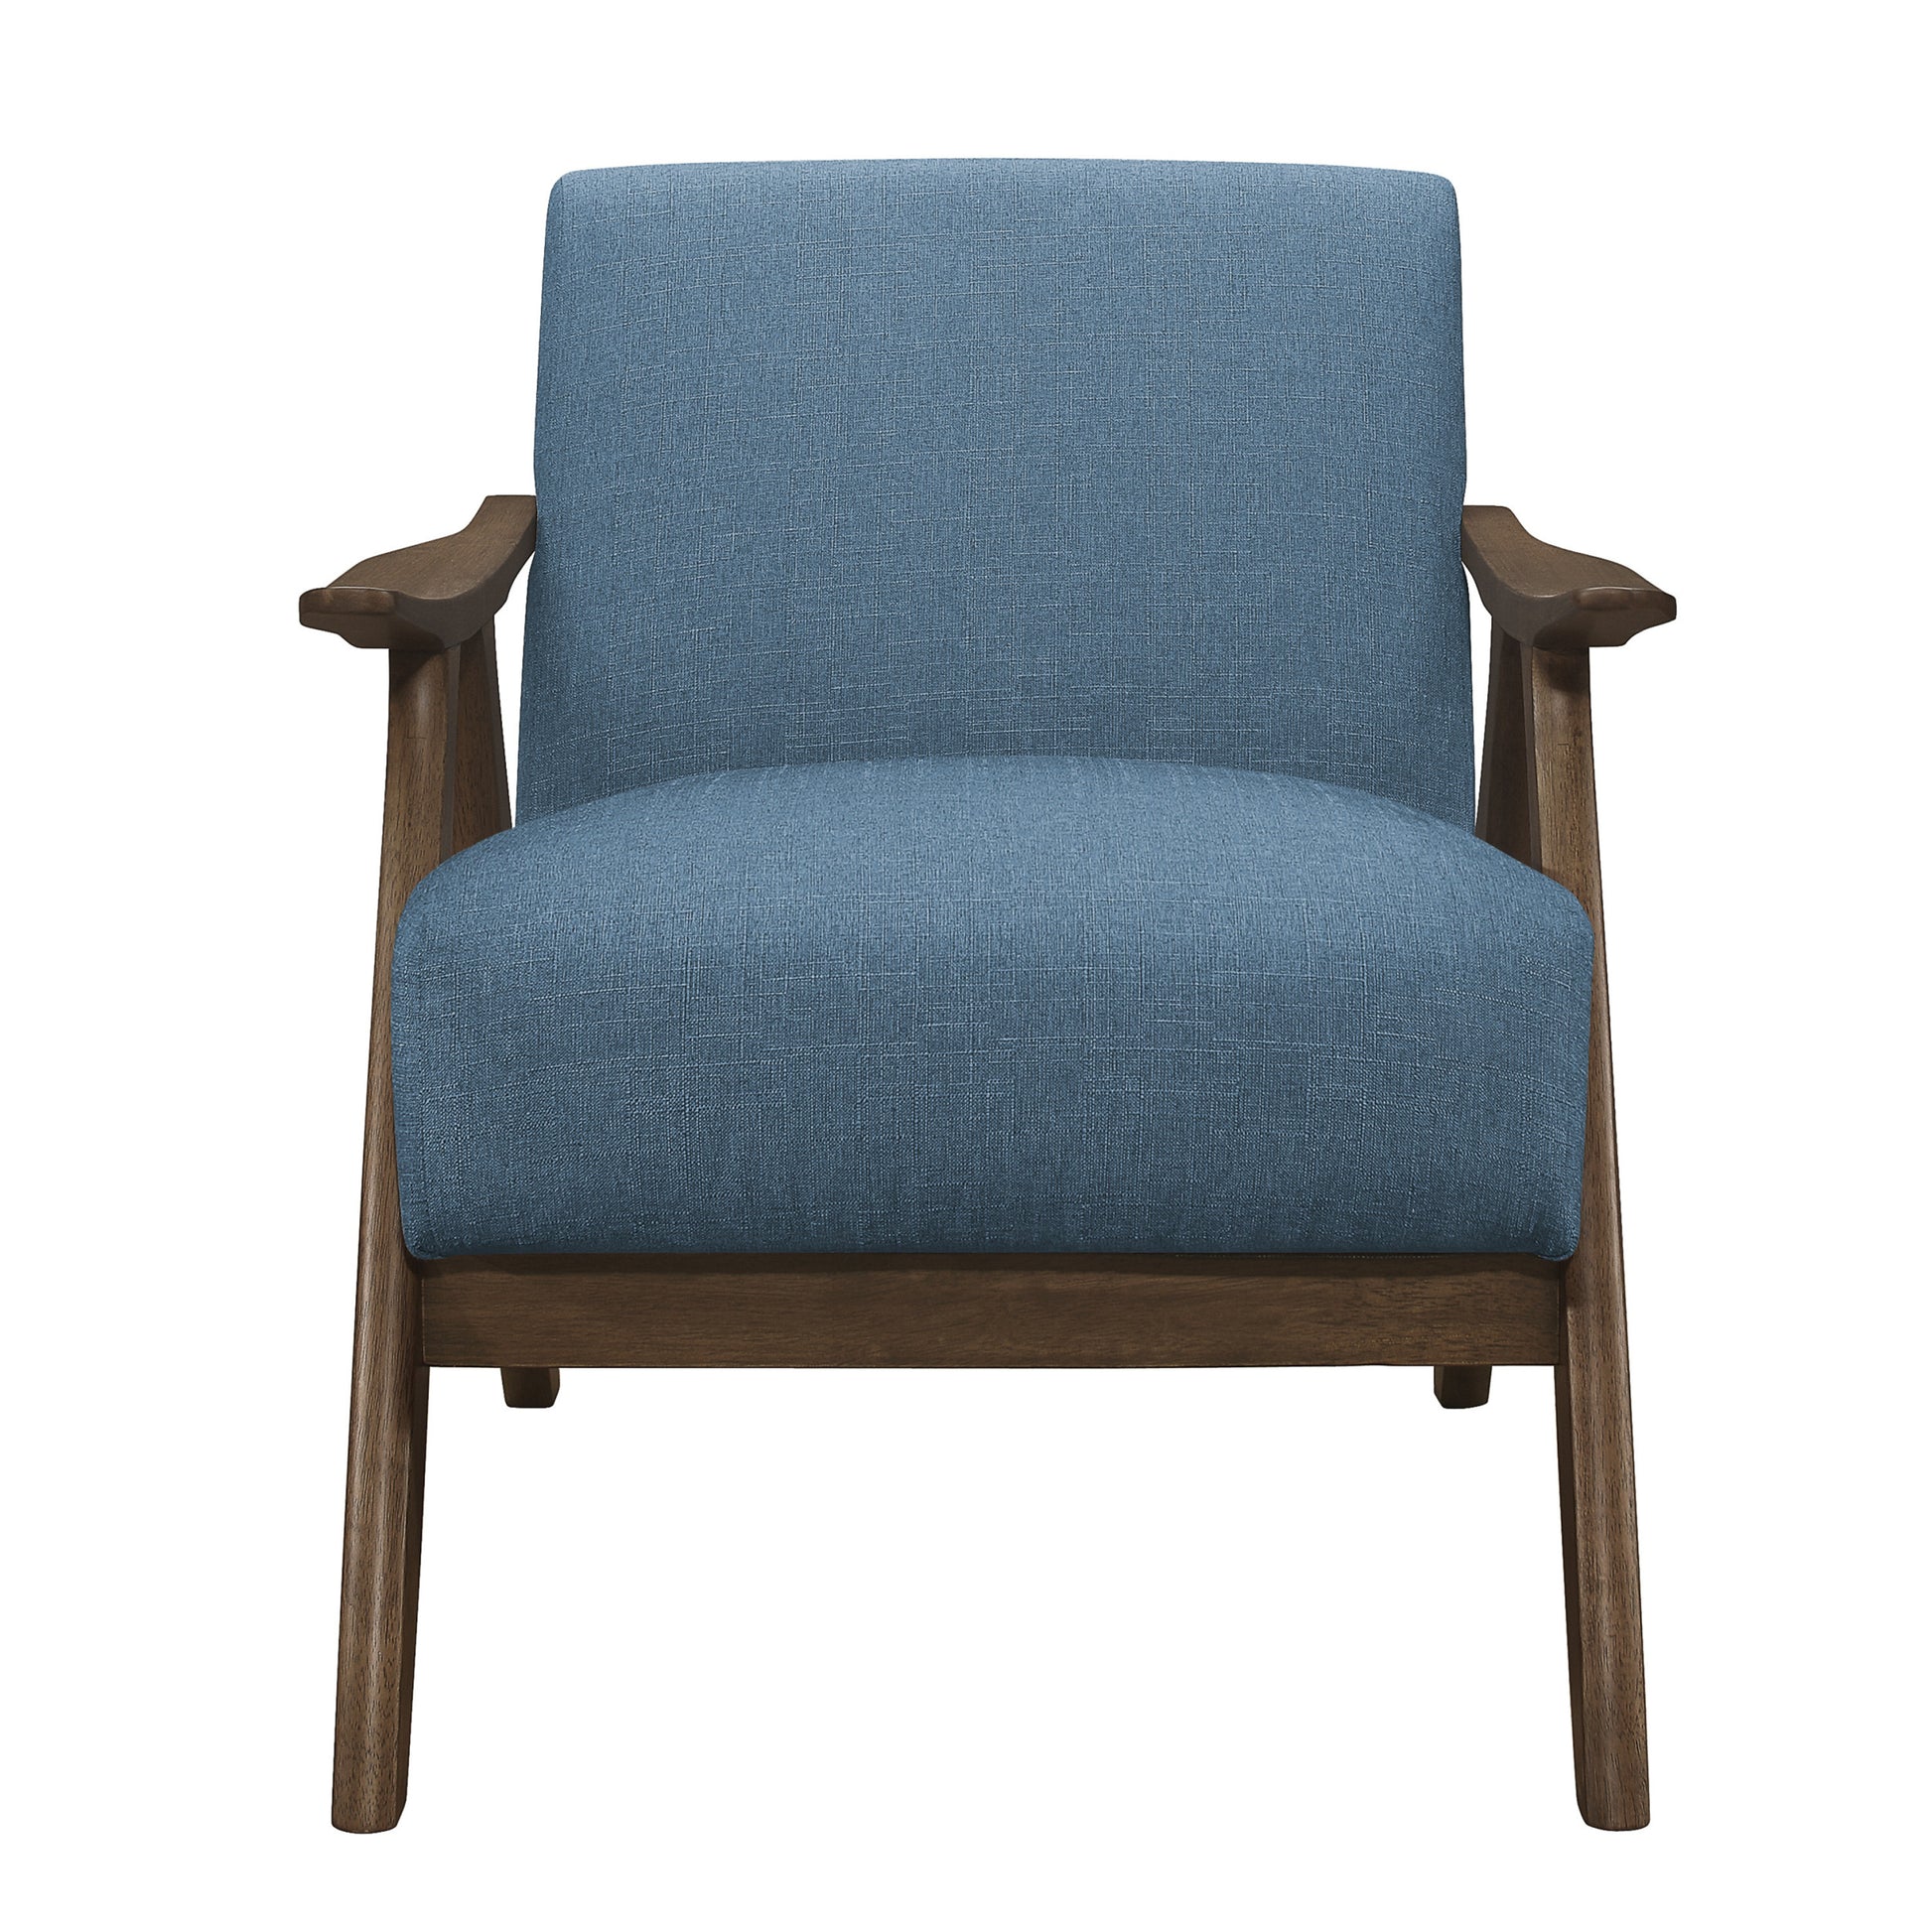 Modern Home Furniture Blue Fabric Upholstered 1pc blue-primary living space-retro-solid wood